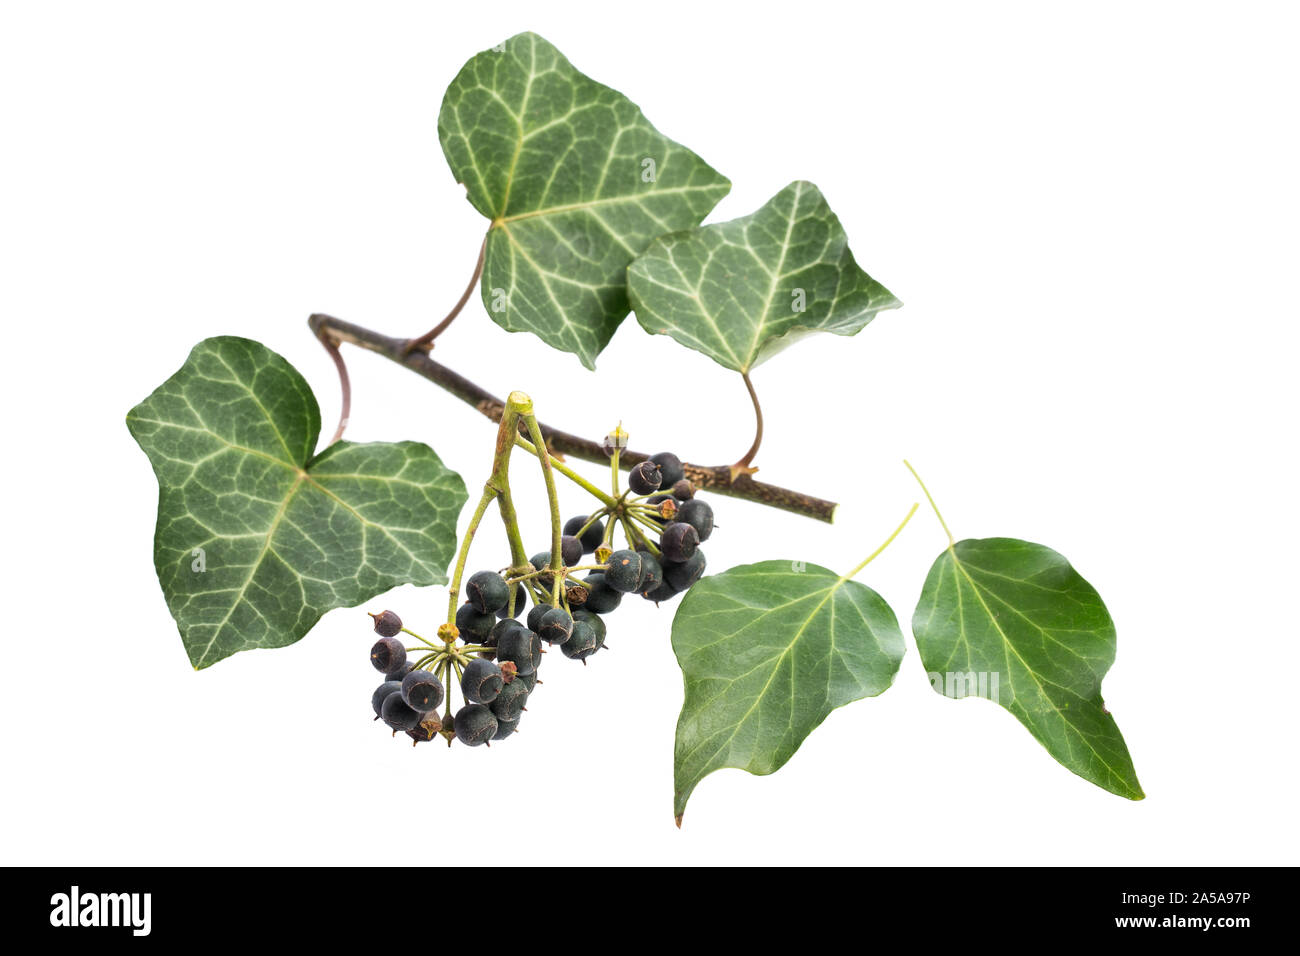 healing plants: Ivy (Hedera helix) parts of the plant Stock Photo